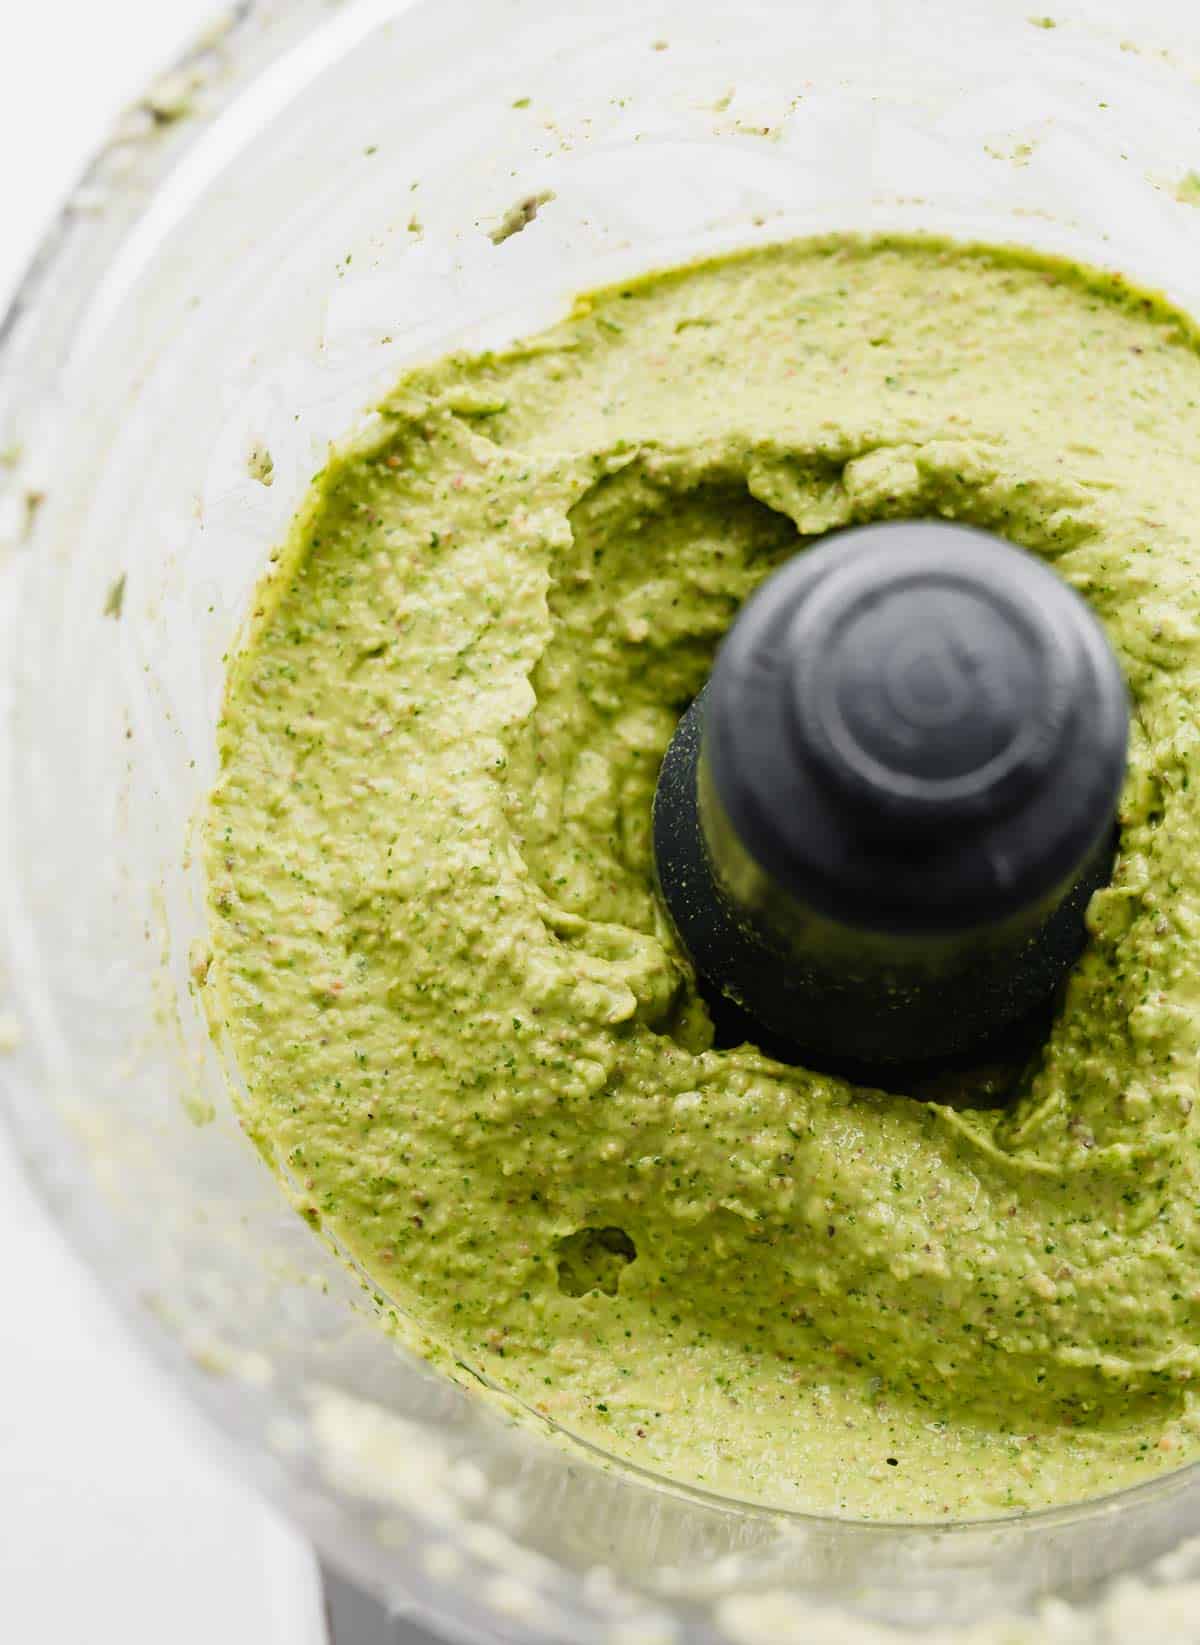 An avocado and herb green sauce in a food processor.